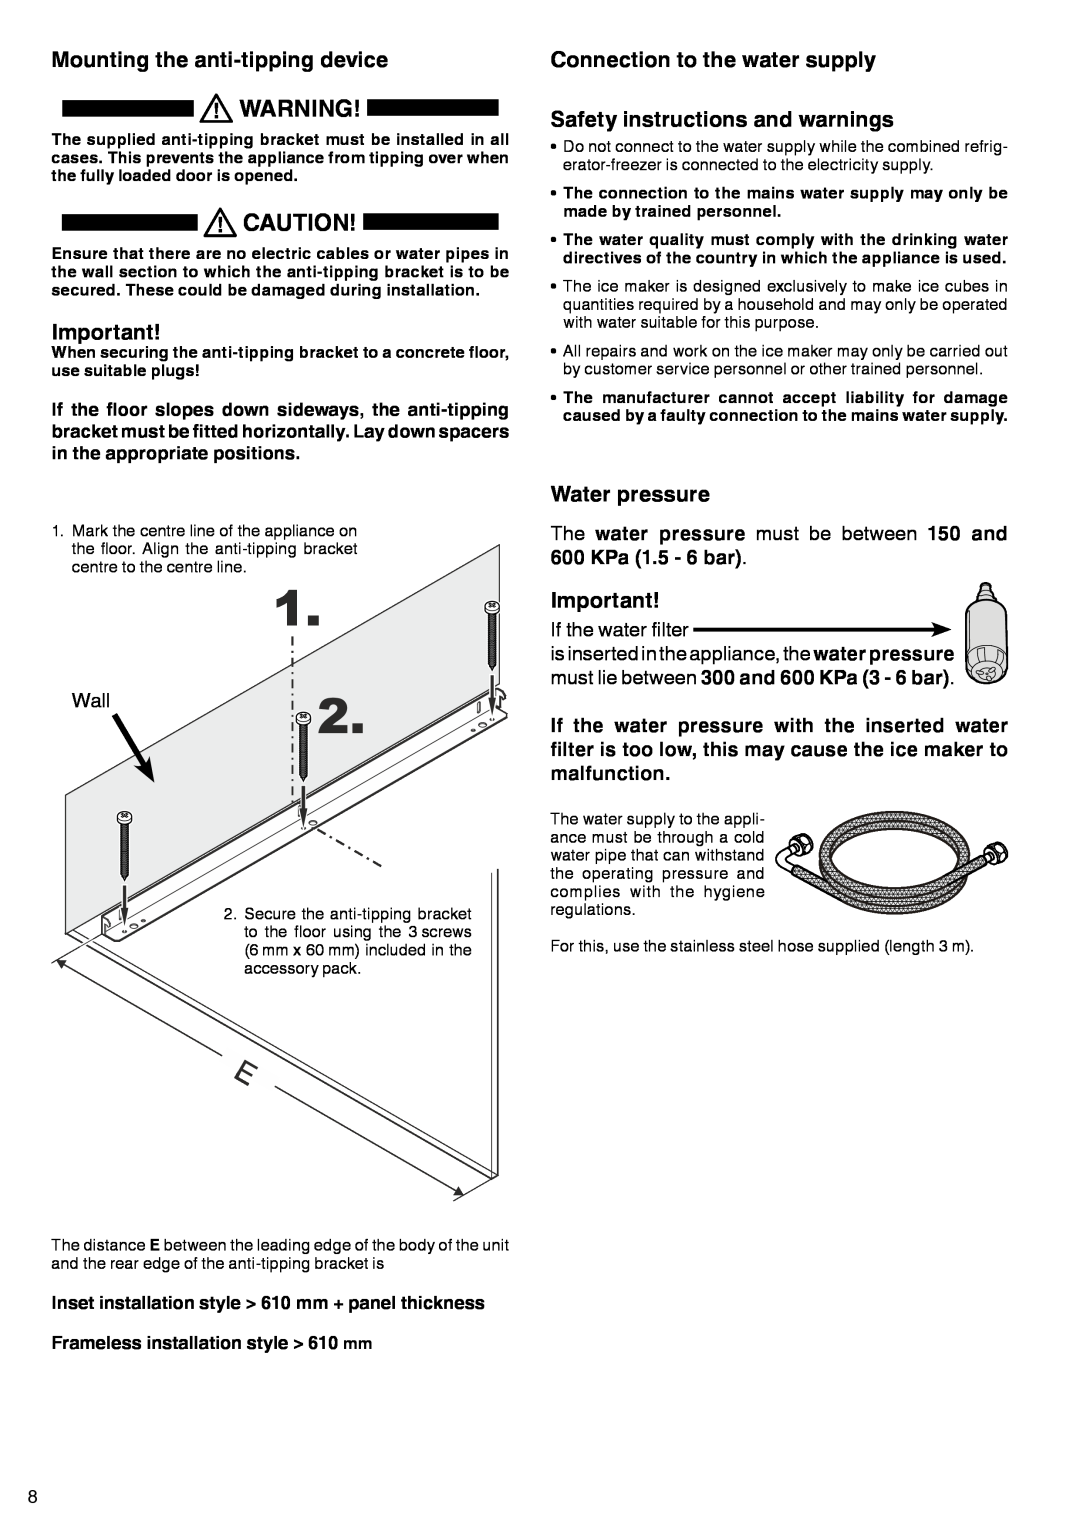 Liebherr 7083-103-00 Mounting the anti-tippingdevice, Connection to the water supply, Safety instructions and warnings 